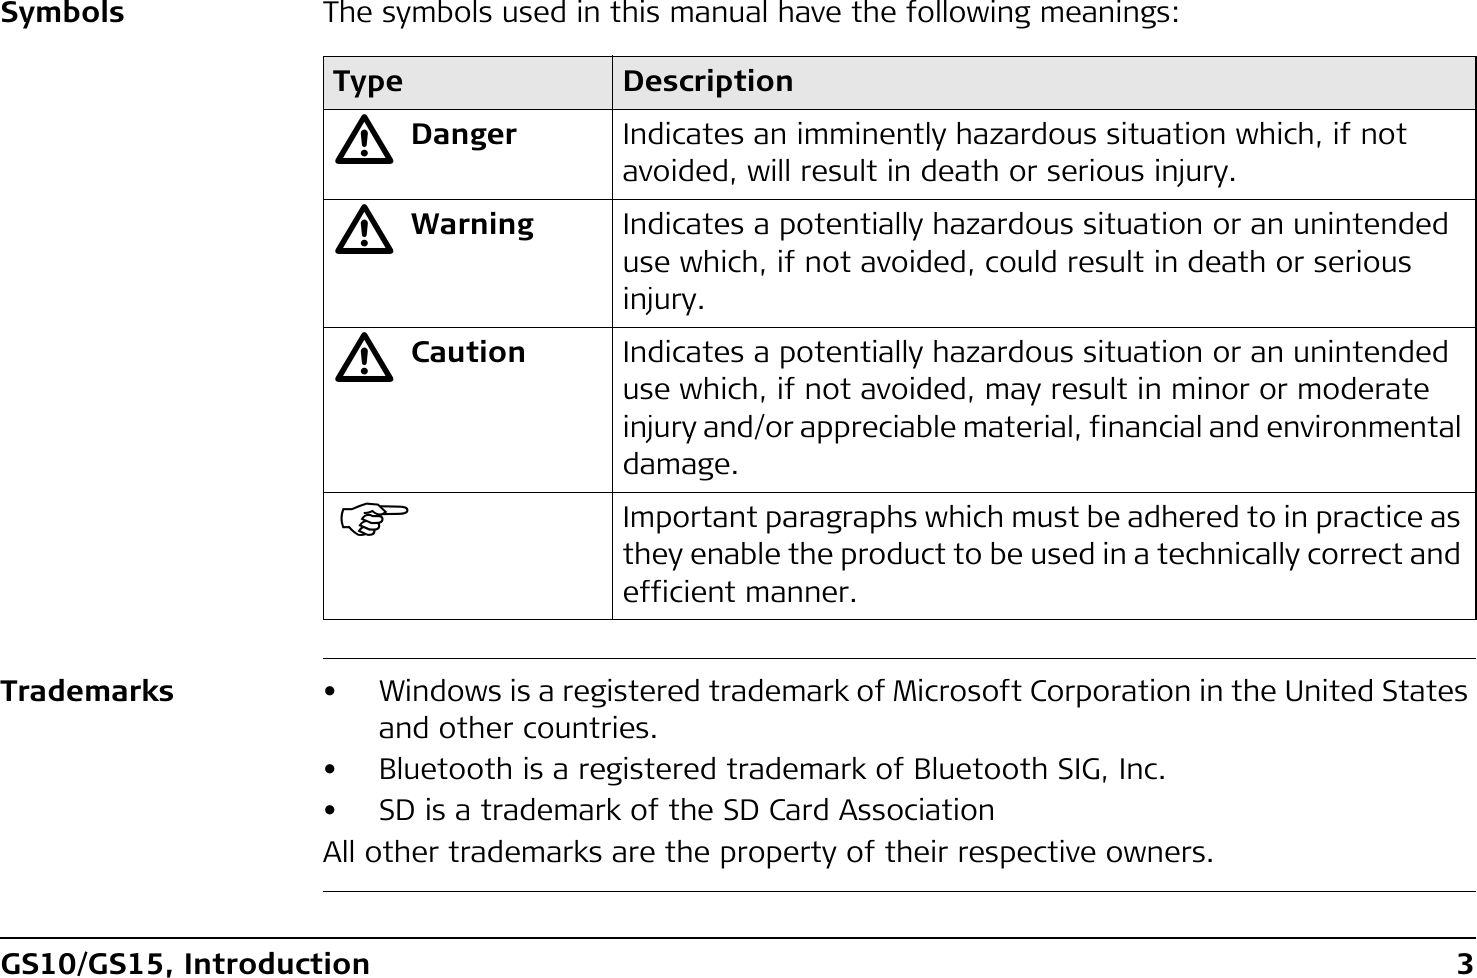 GS10/GS15, Introduction 3Symbols The symbols used in this manual have the following meanings:Trademarks • Windows is a registered trademark of Microsoft Corporation in the United States and other countries.• Bluetooth is a registered trademark of Bluetooth SIG, Inc.• SD is a trademark of the SD Card AssociationAll other trademarks are the property of their respective owners.Type DescriptionƽDanger Indicates an imminently hazardous situation which, if not avoided, will result in death or serious injury.ƽWarning Indicates a potentially hazardous situation or an unintended use which, if not avoided, could result in death or serious injury.ƽCaution Indicates a potentially hazardous situation or an unintended use which, if not avoided, may result in minor or moderate injury and/or appreciable material, financial and environmental damage.)Important paragraphs which must be adhered to in practice as they enable the product to be used in a technically correct and efficient manner.